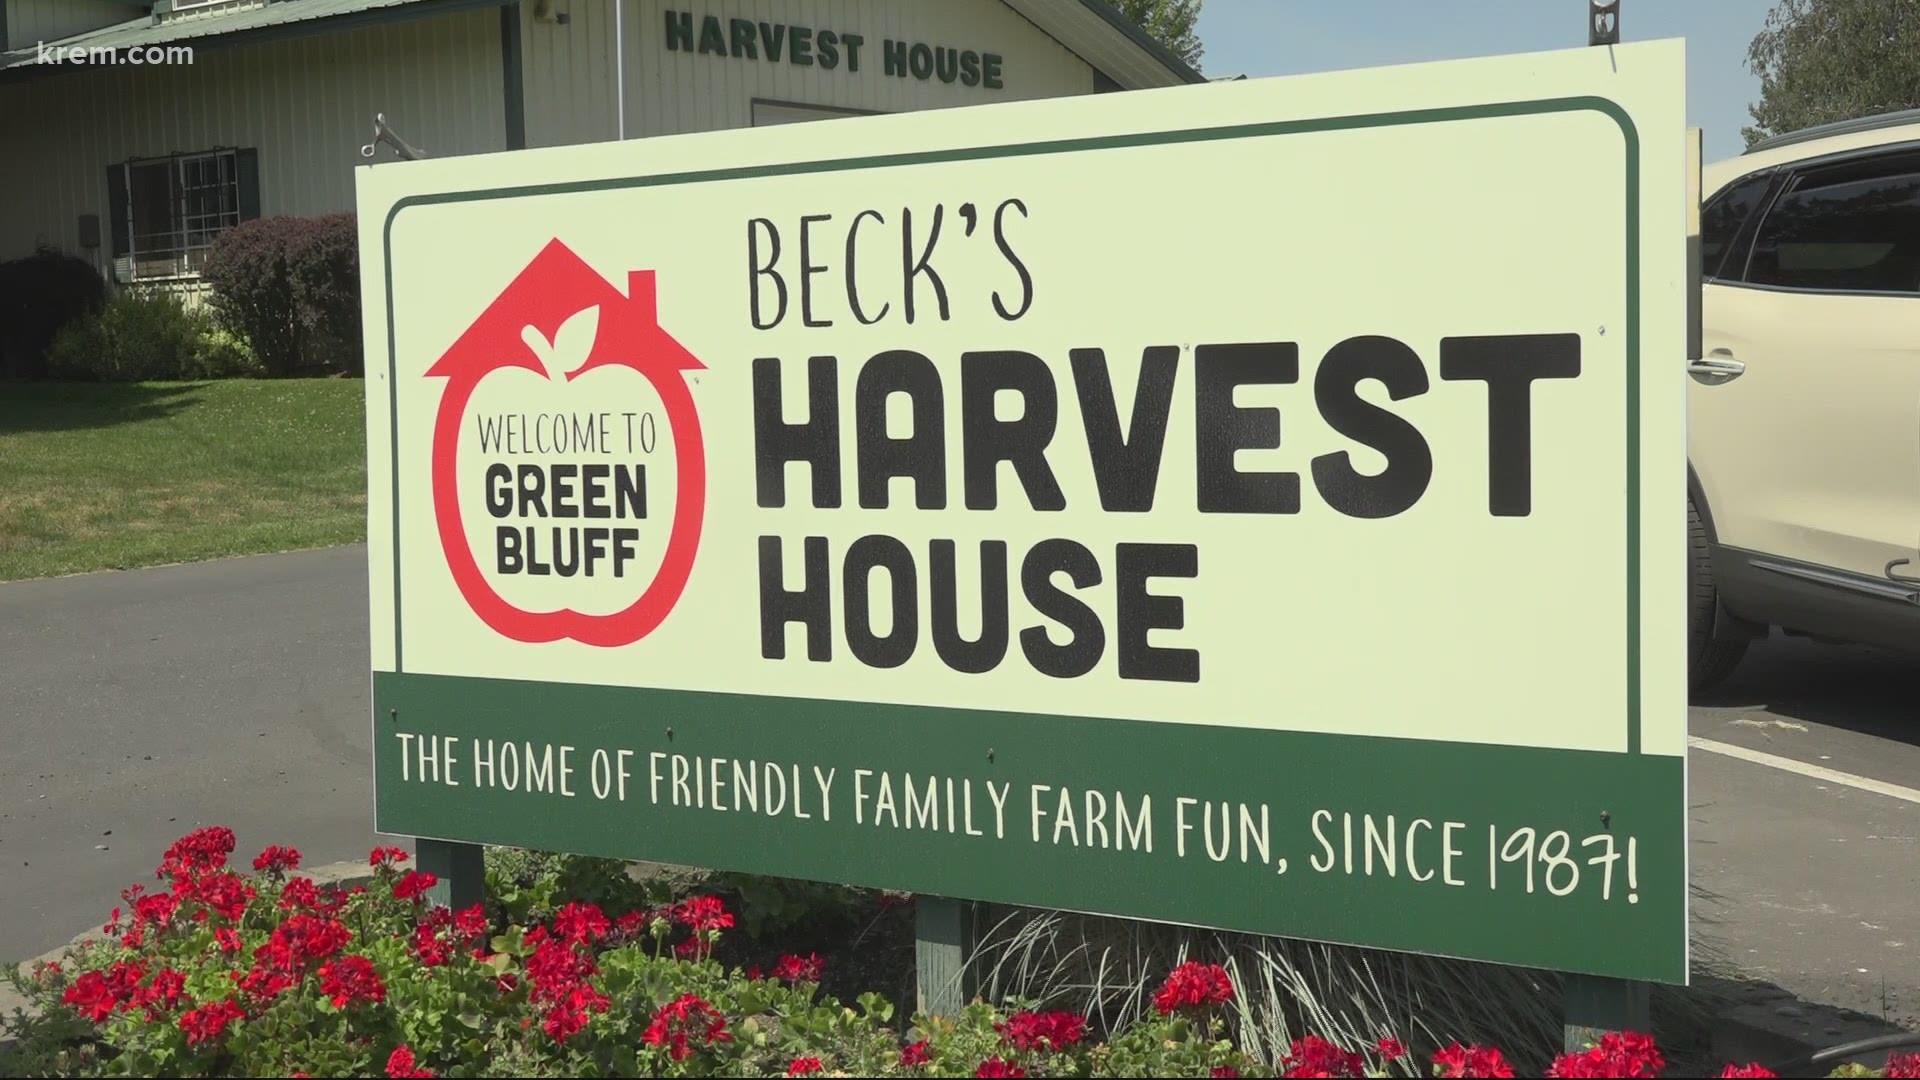 Beck's Harvest House says the cherry harvest is so good this season he's considering it a "bumper crop," an agricultural term for a crop with a unusually high yield.